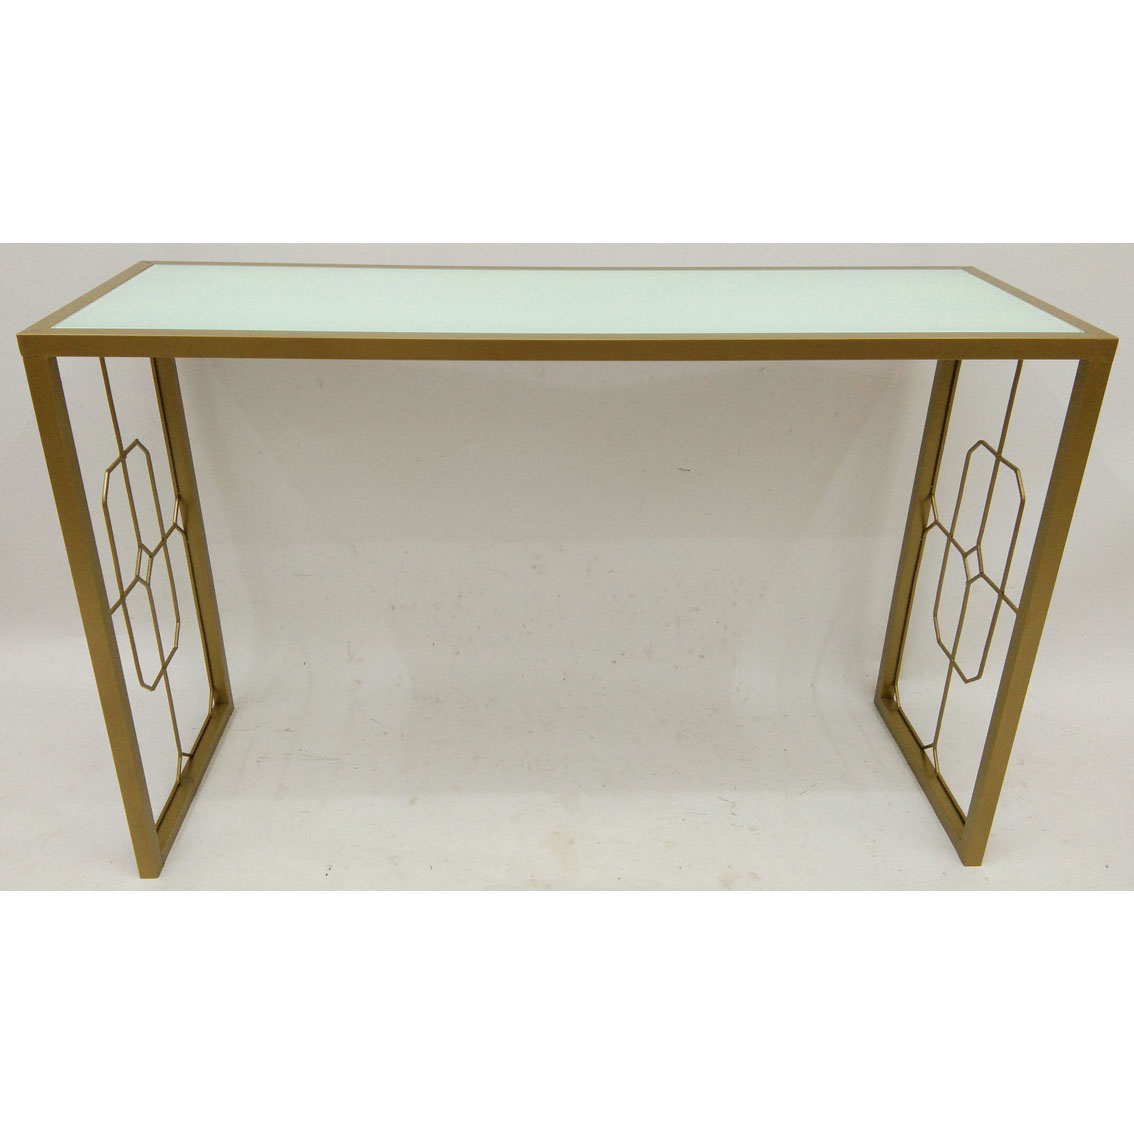 Shiny Gold Metal Console Table with white glass top